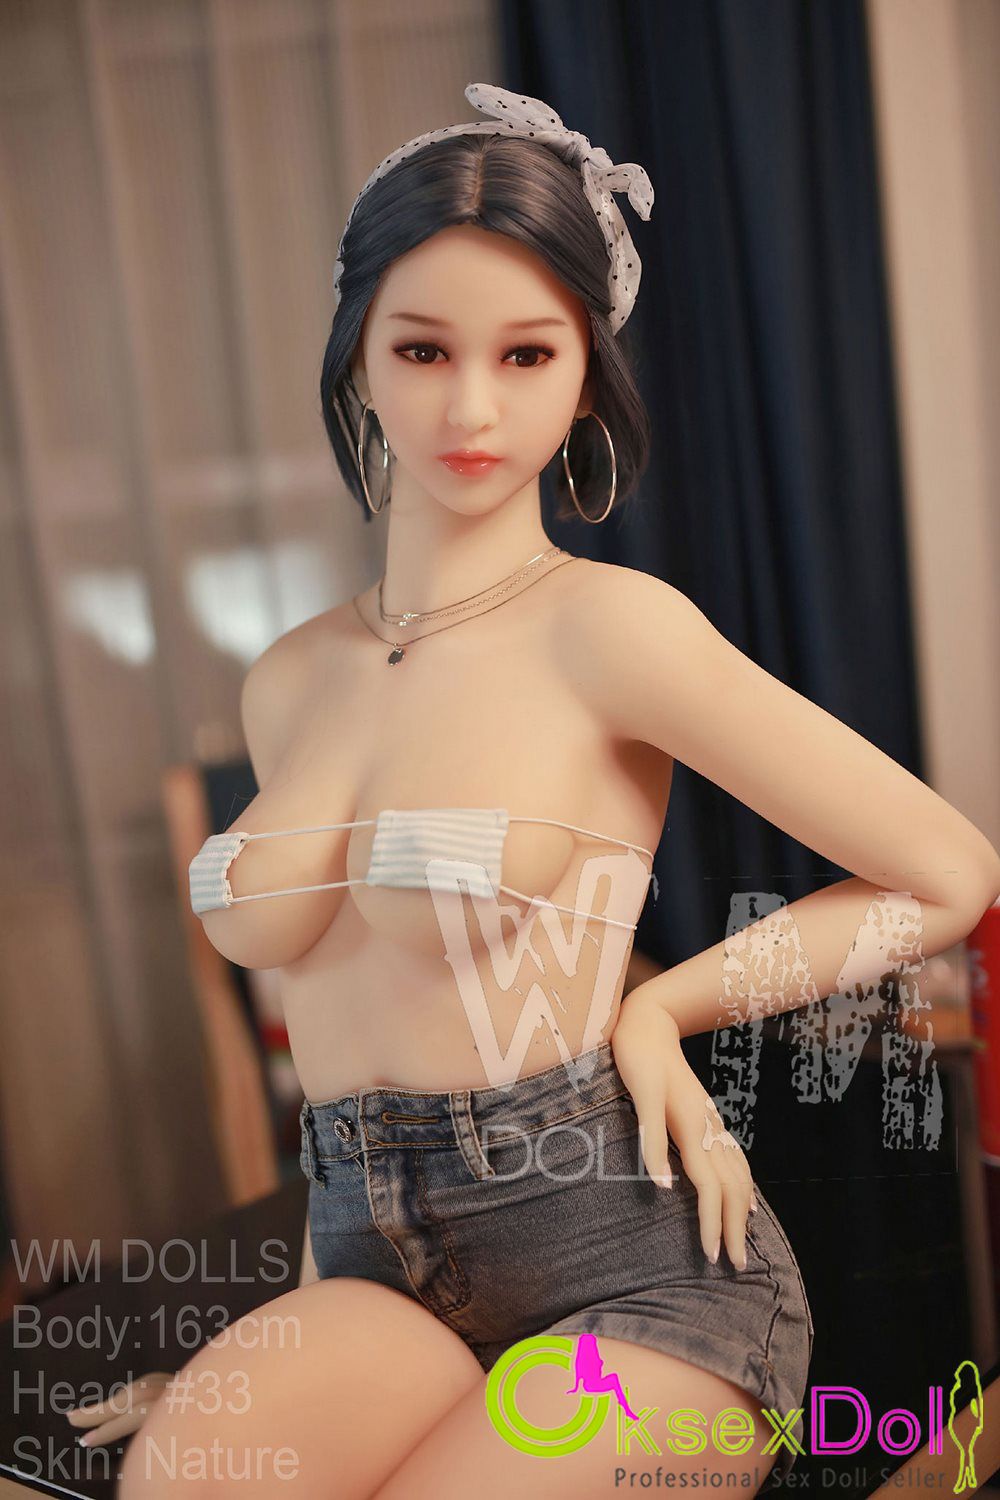 Chinese Beauties Sexy Dolls Gallery